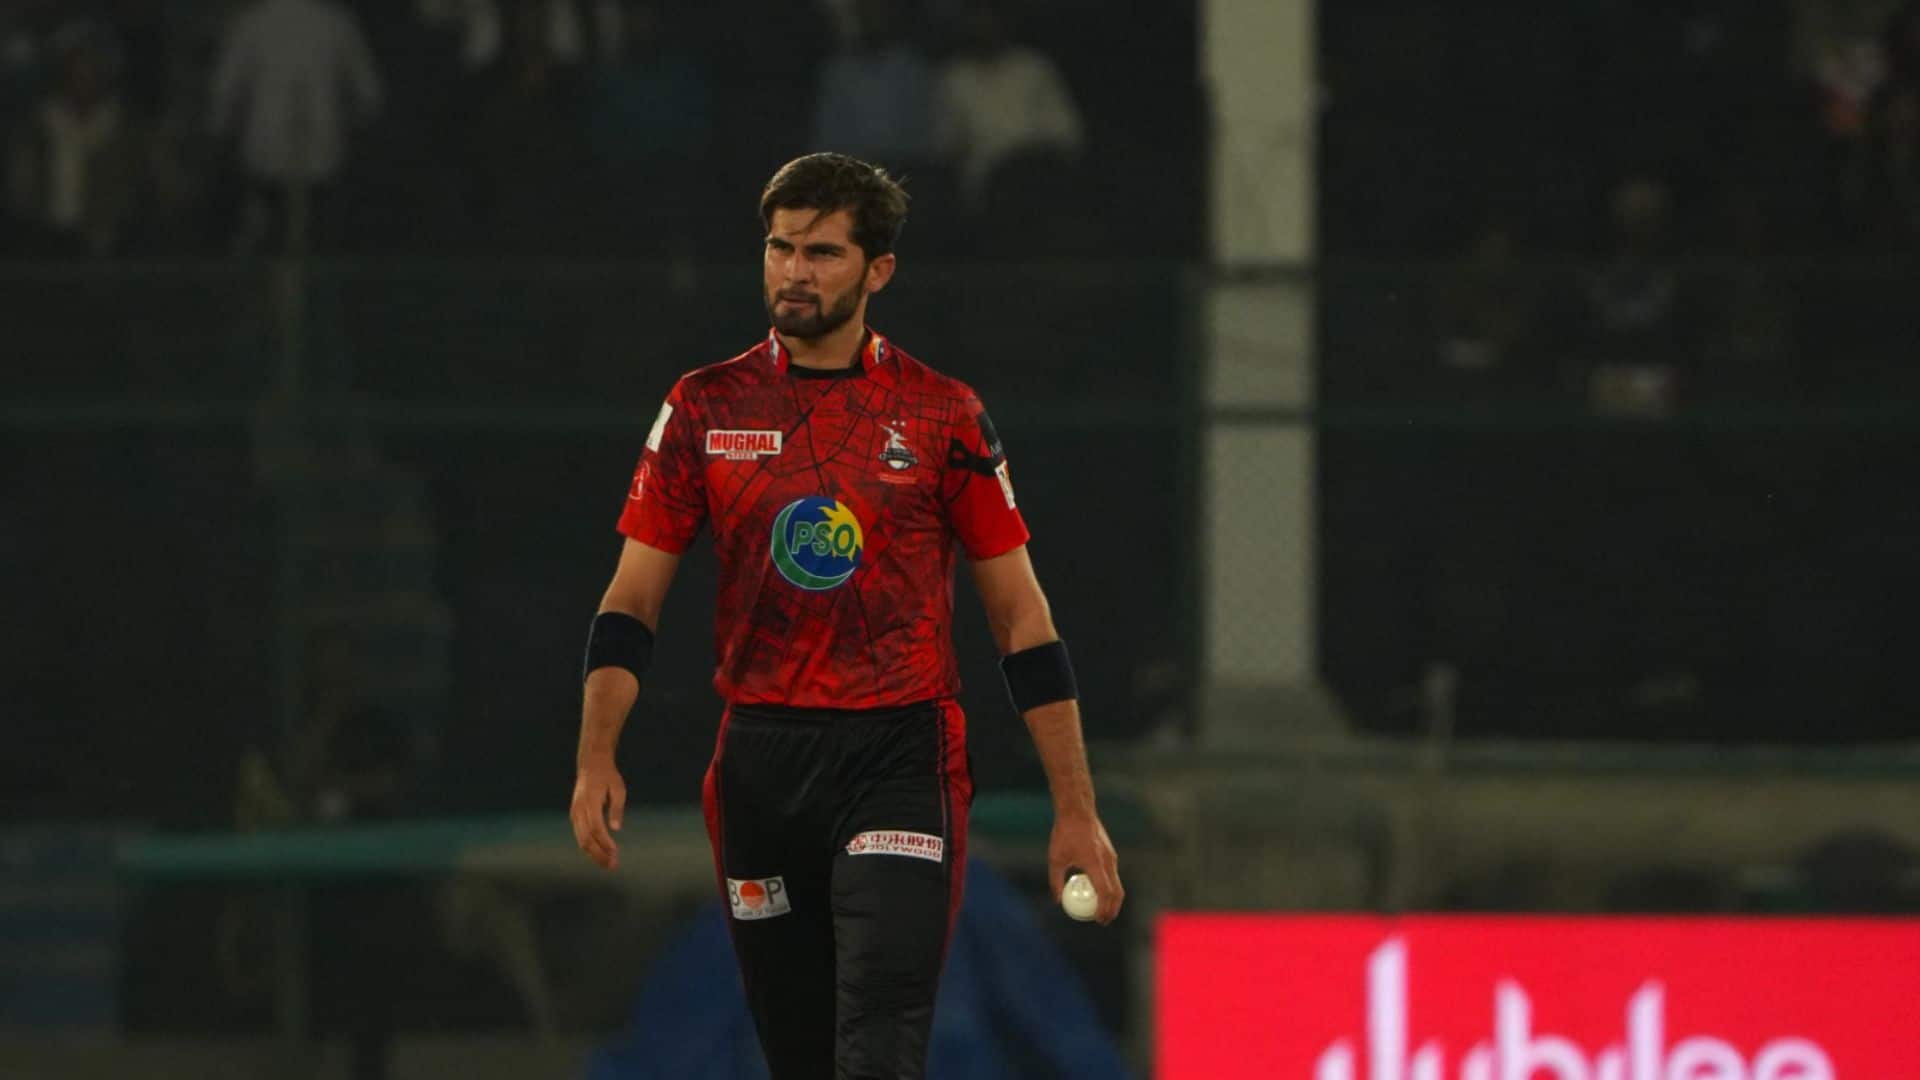 Lahore Qalandars are placed sixth in the standings [X.com]